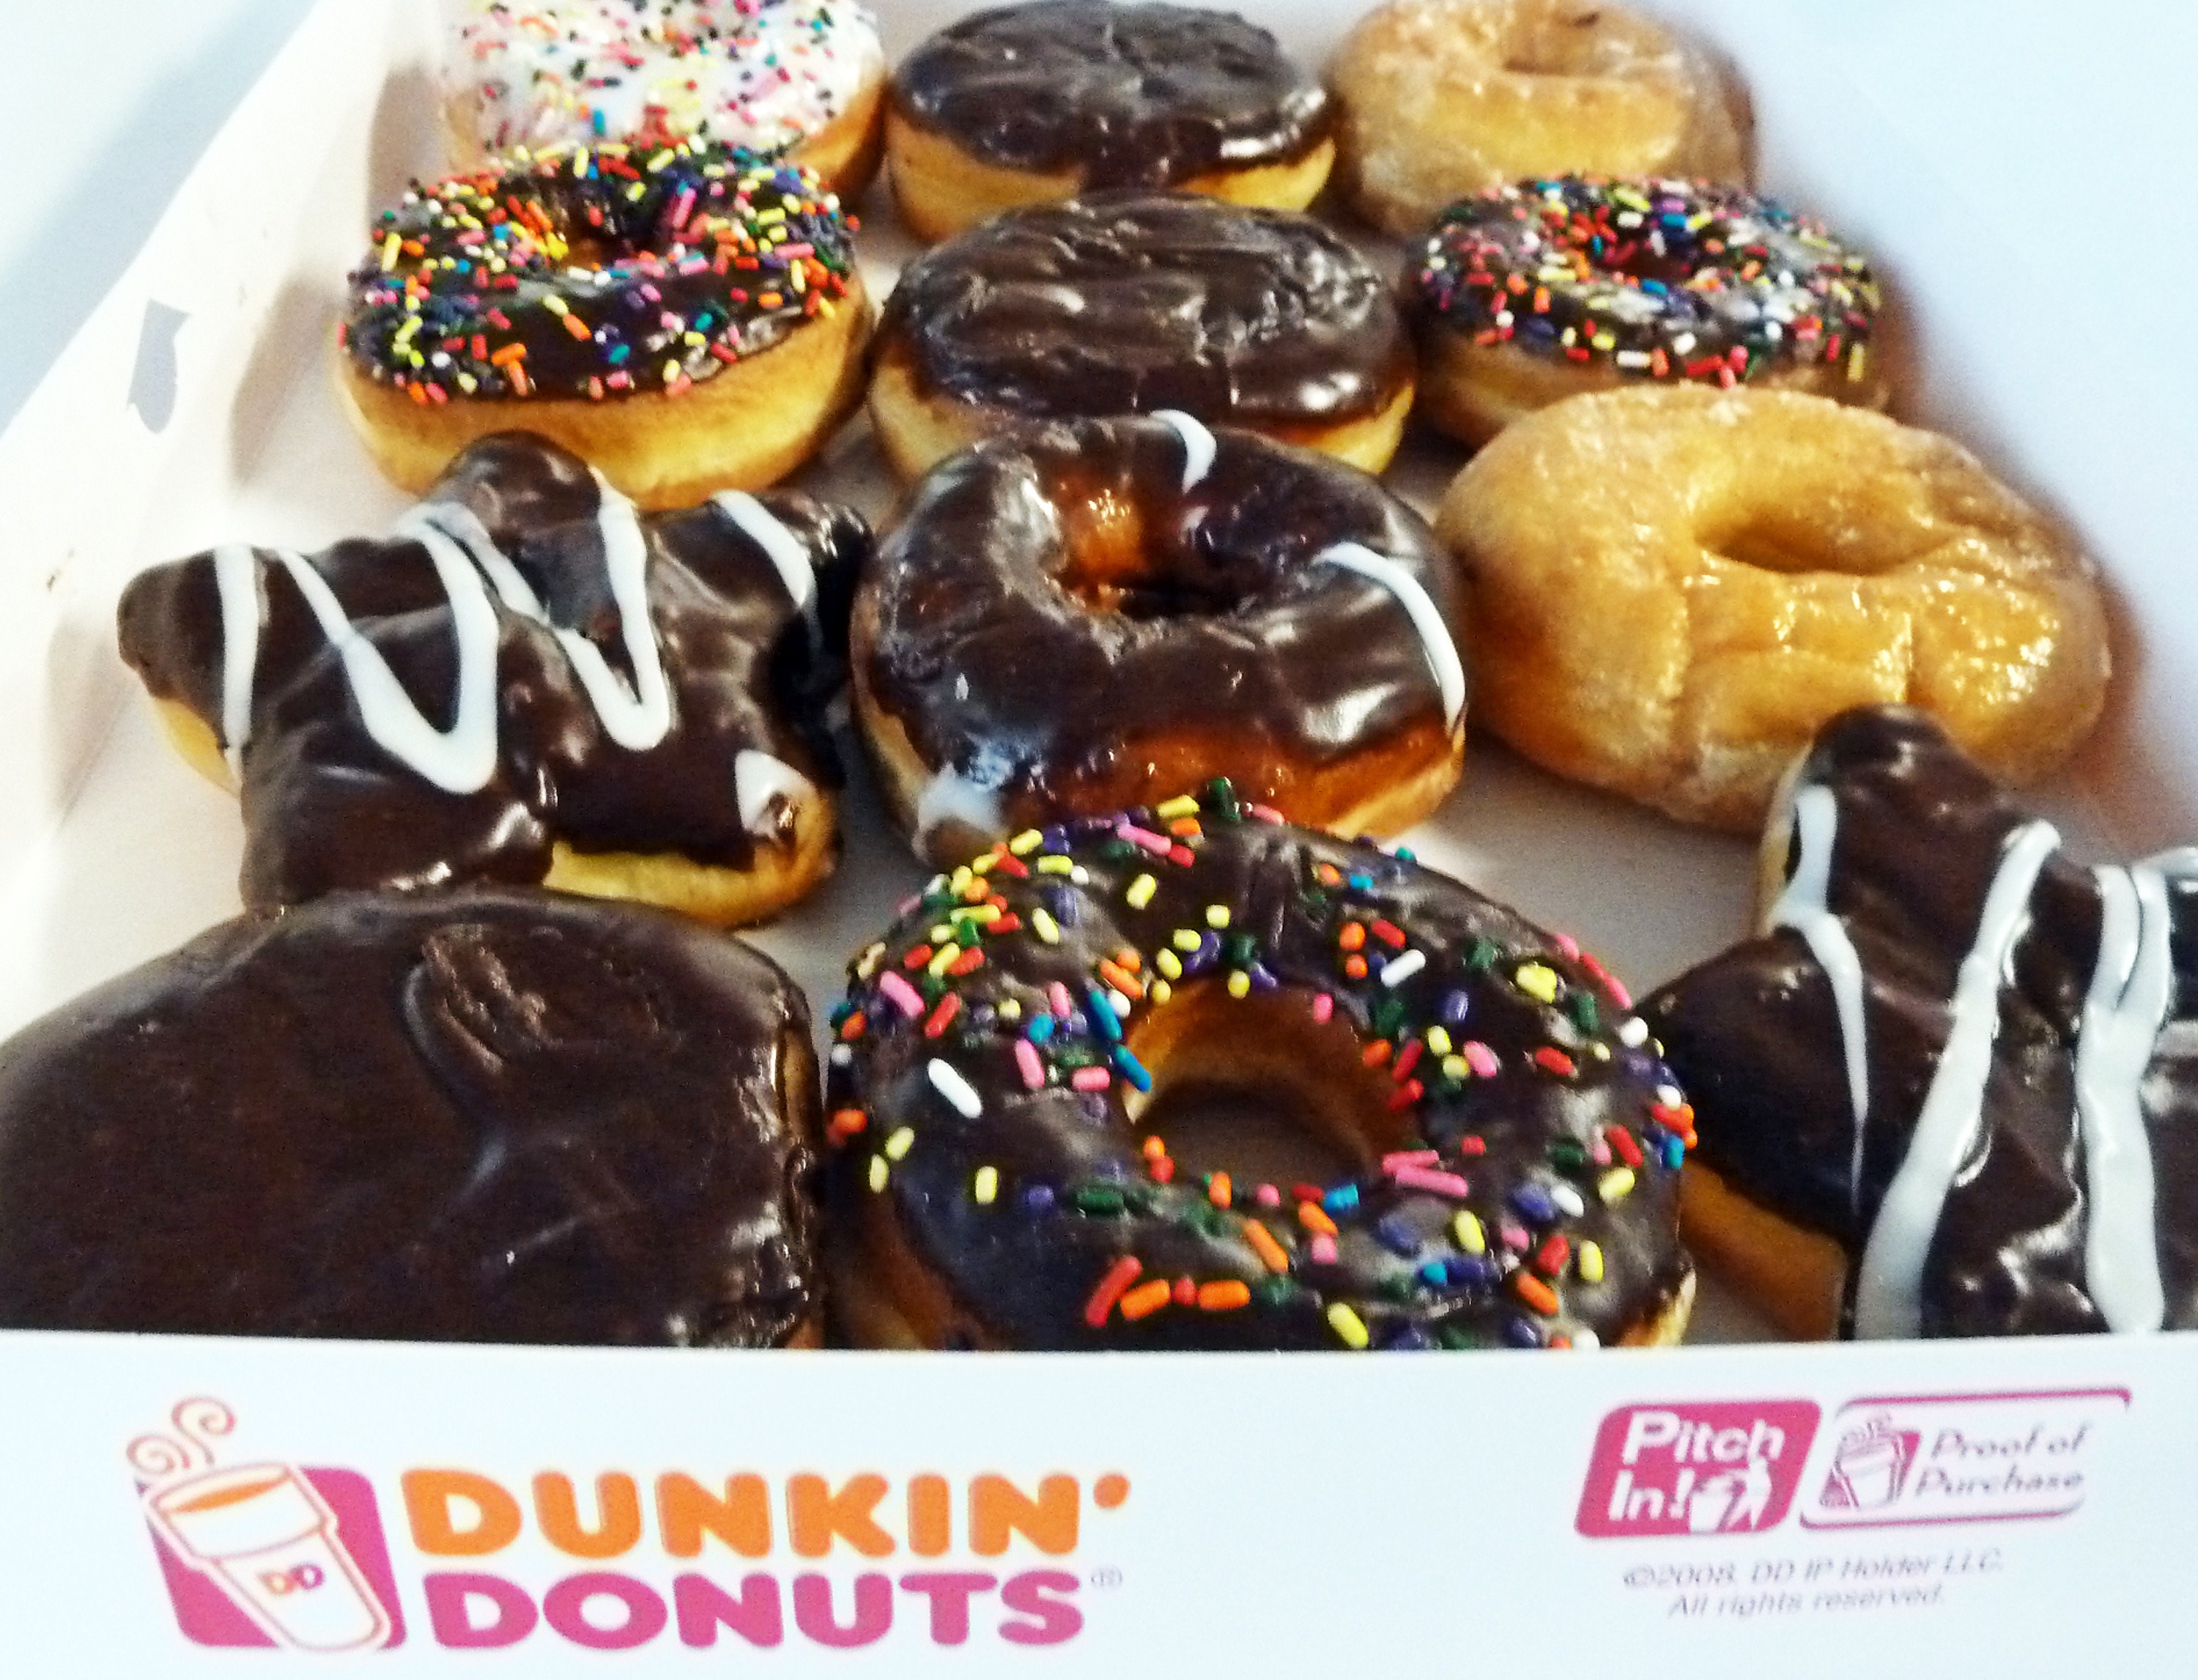 Beware of This Dunkin' Donuts Coupon Floating Around Offering Free Doughnuts